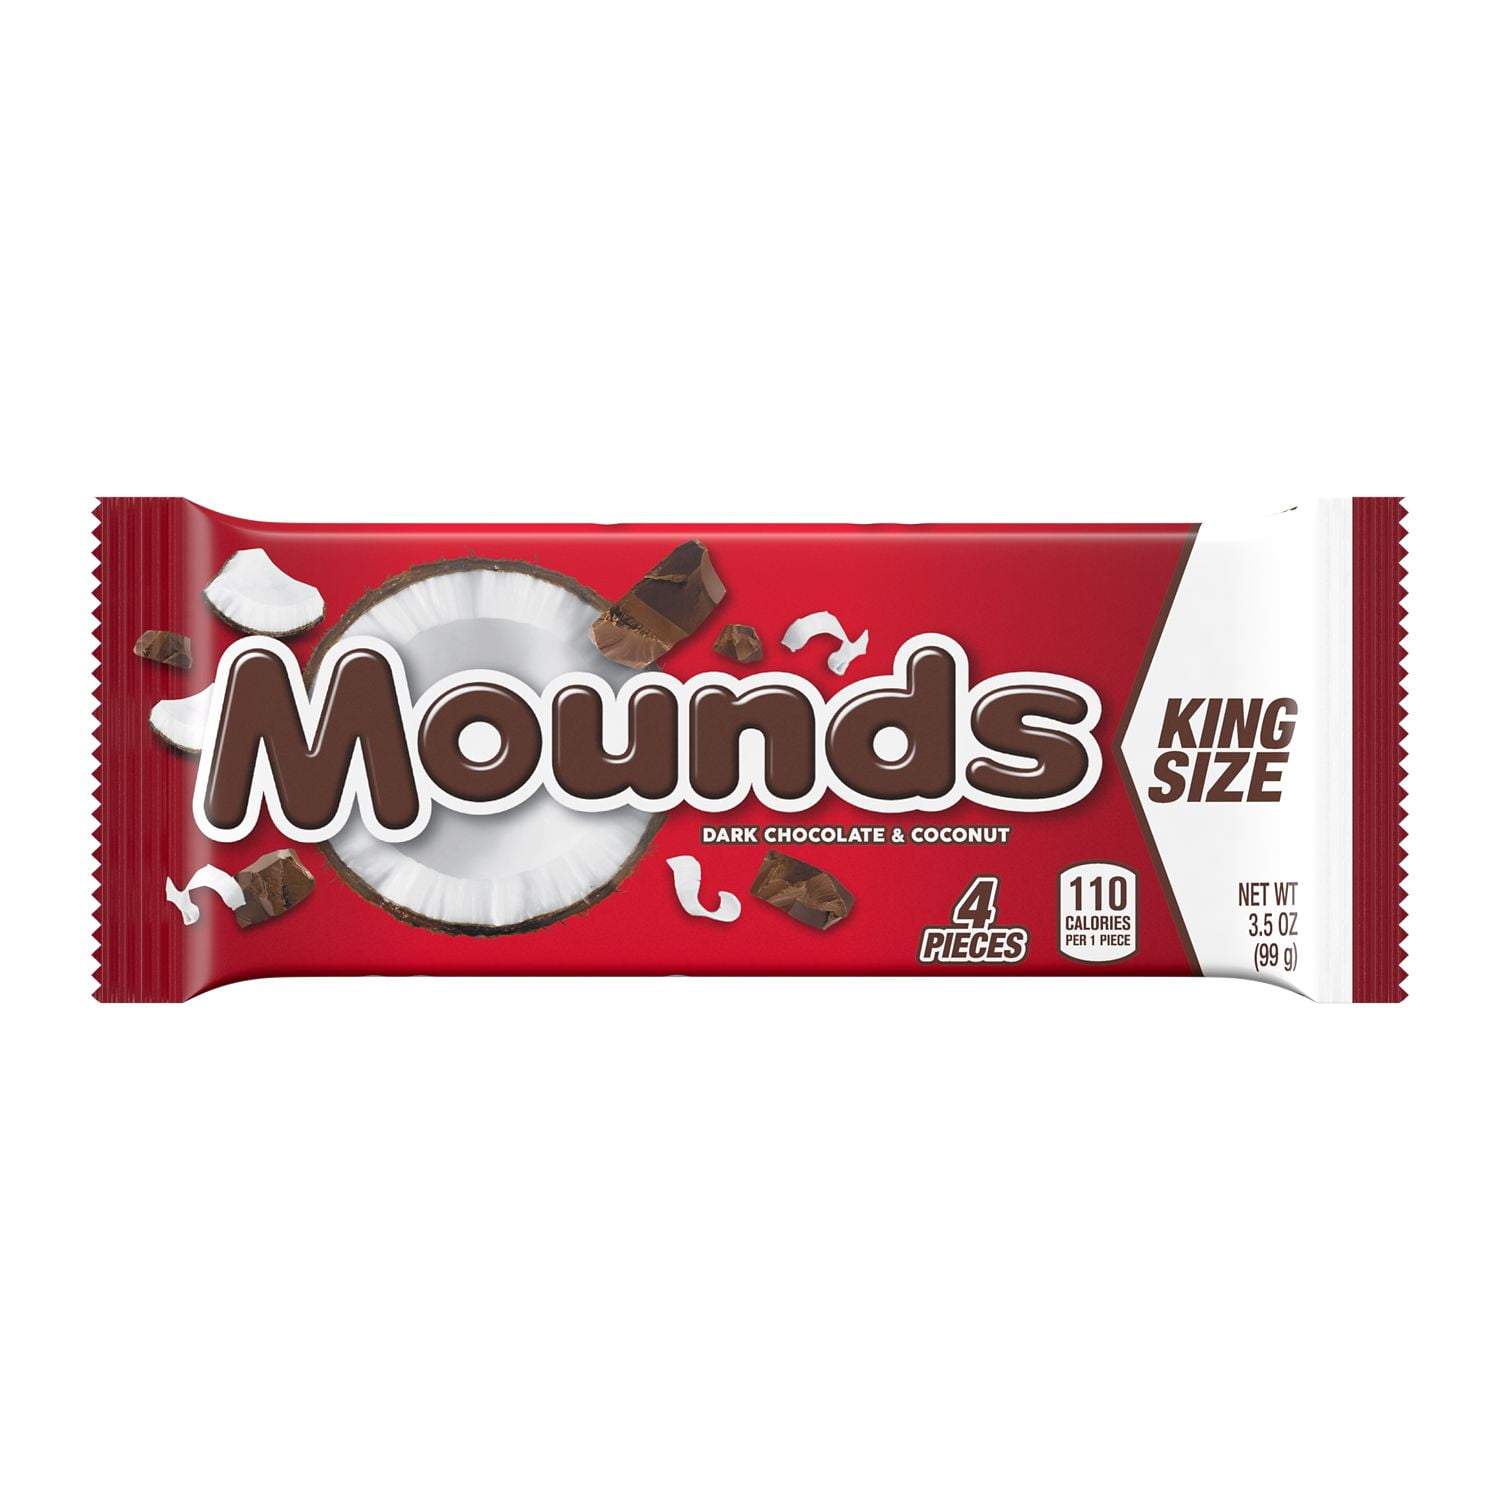 MOUNDS, Dark Chocolate and Coconut Candy Bars, Gluten Free, 3.5 oz, King Size Pack (4 Pieces)